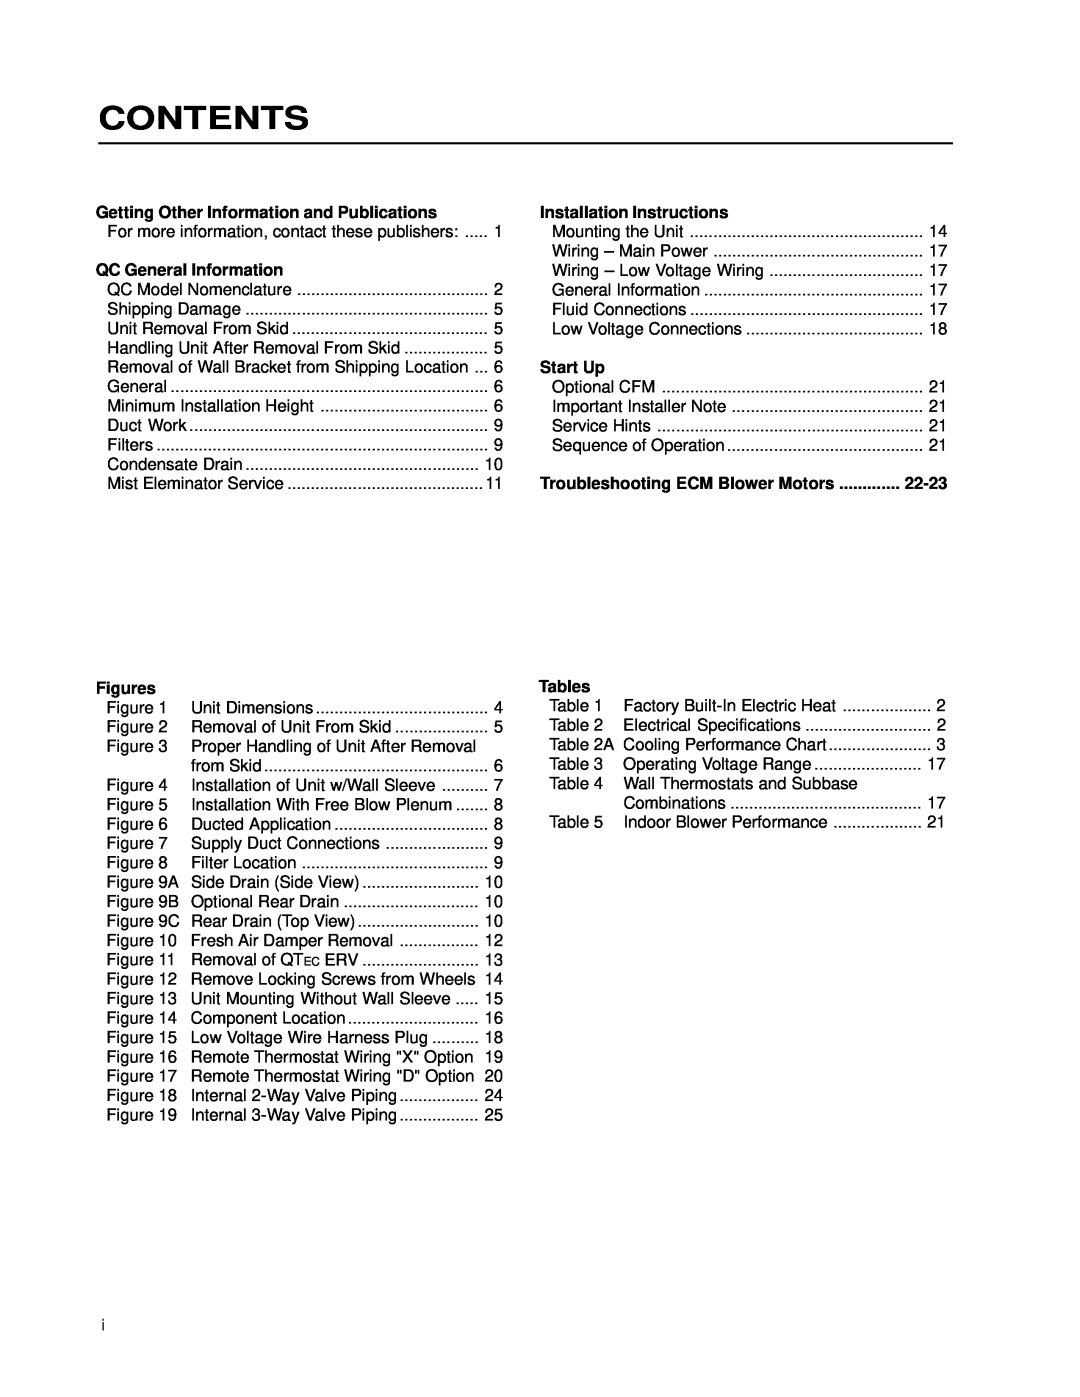 Bard QC501 Contents, Getting Other Information and Publications, QC General Information, Figures, Start Up, 22-23, Tables 